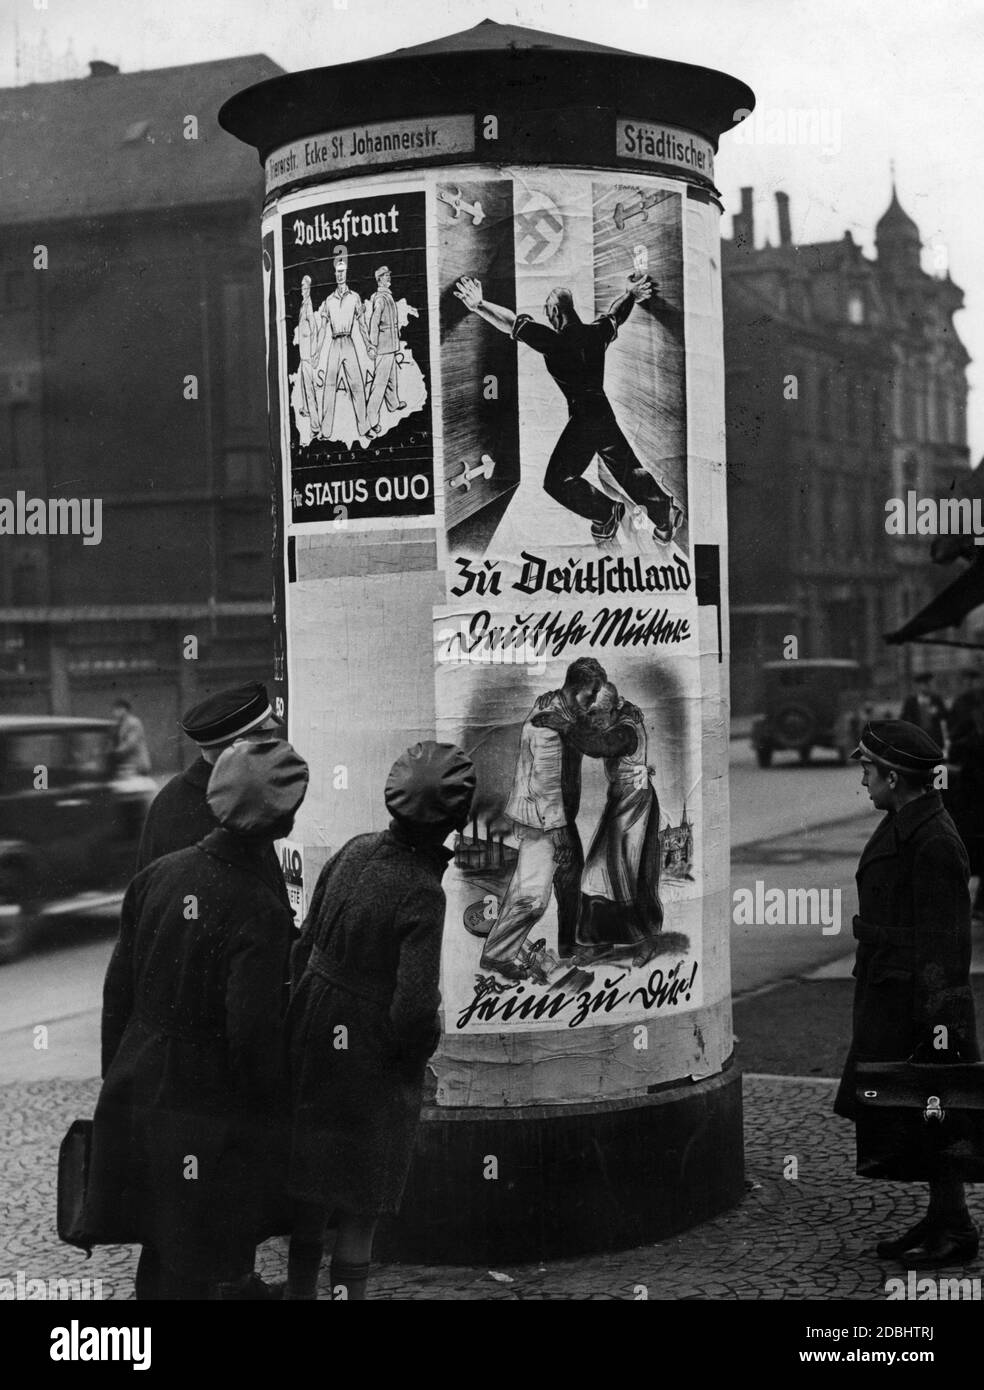 'At one of the advertising pillars on the corner of St. Johannerstrasse in Saarbruecken, passers-by look at election posters for the referendum on the annexation of the Saar region to the German Reich on 13.01.1935. On the left, the election poster of the separatist ''Volksfront''. Three men who are ready to fight back stand arm in arm on a map of the Saar area against the Third Reich. Caption: ''For Status Quo''. On the right the posters of the Deutsche Front. Above: ''To Germany''. A man opens the gate to the Third Reich, symbolised by the swastika. Below: ''German Mother. Home to you!''' Stock Photo